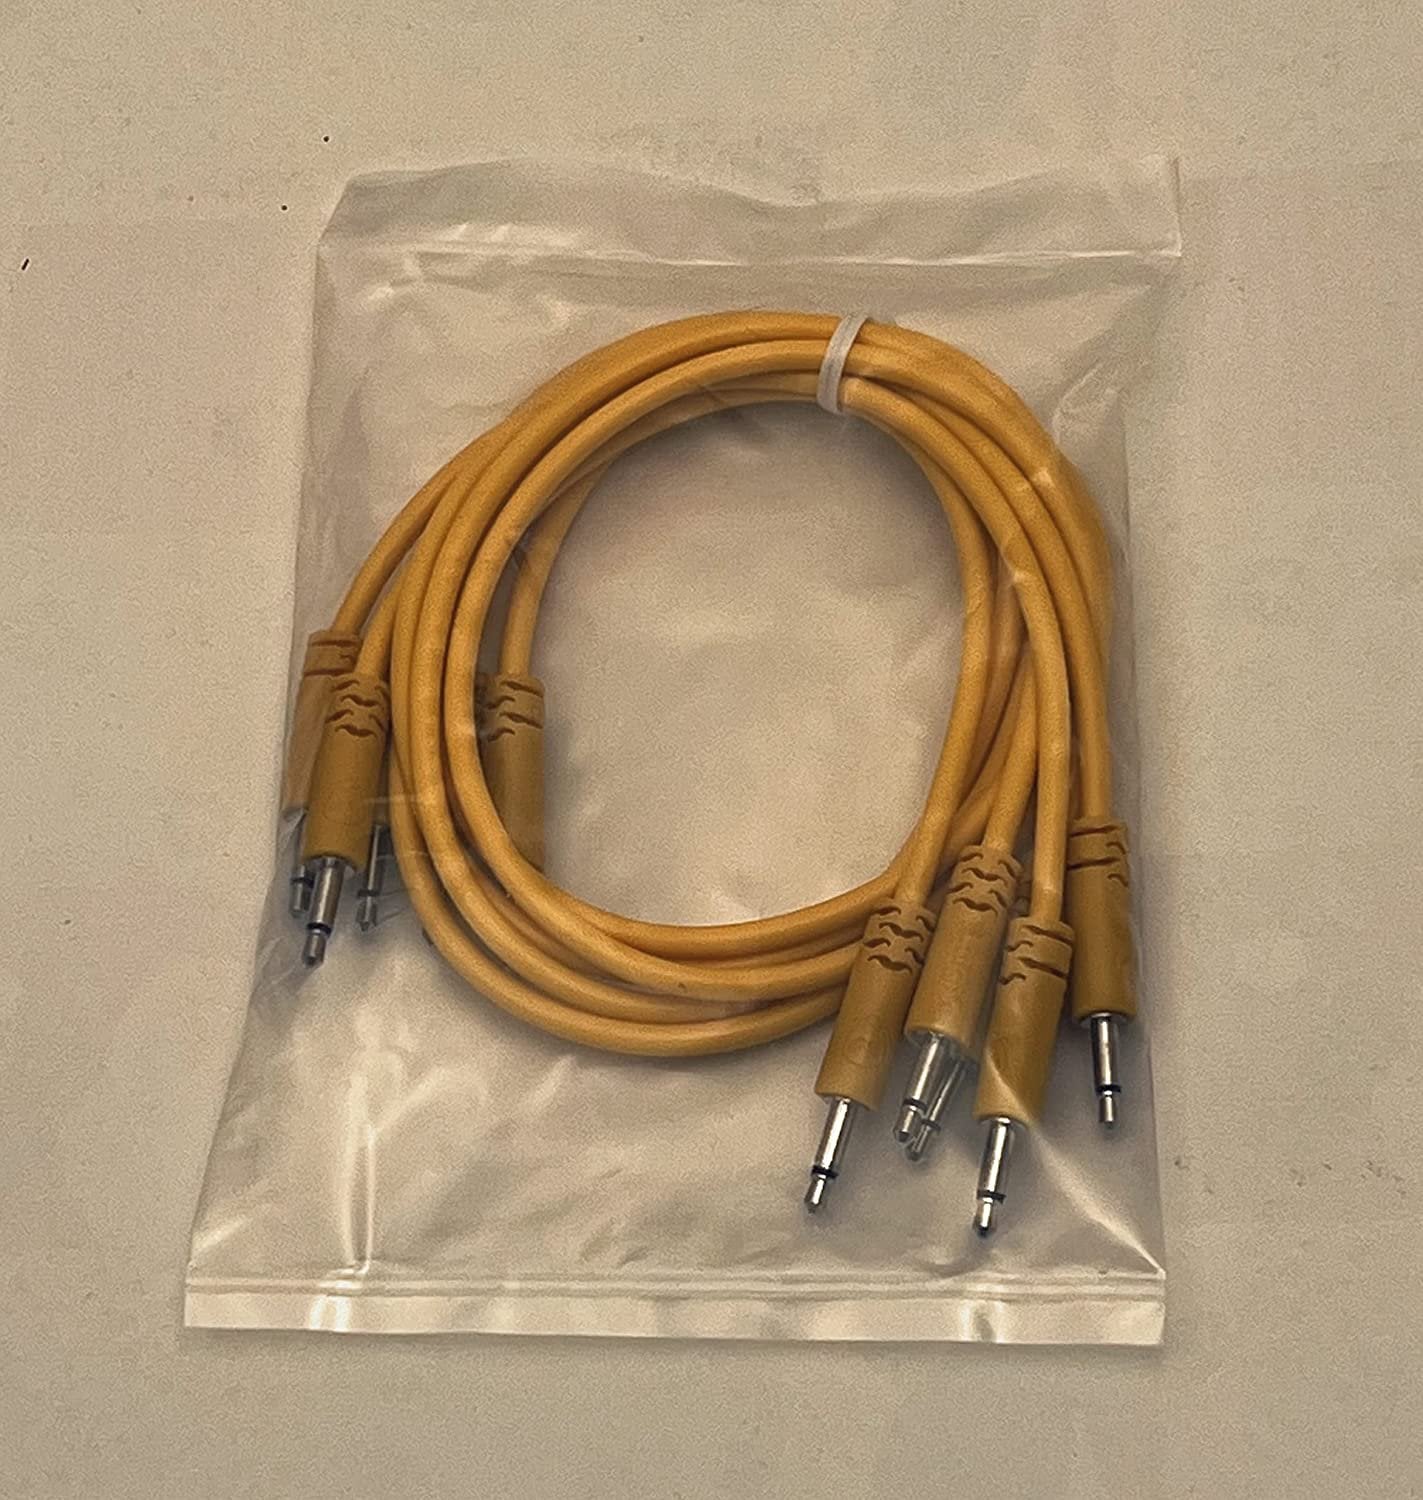 Luigis Modular Supply Spaghetti Eurorack Patch Cables - Package of 5 Gold/Orange Cables, 18 (45 cm)